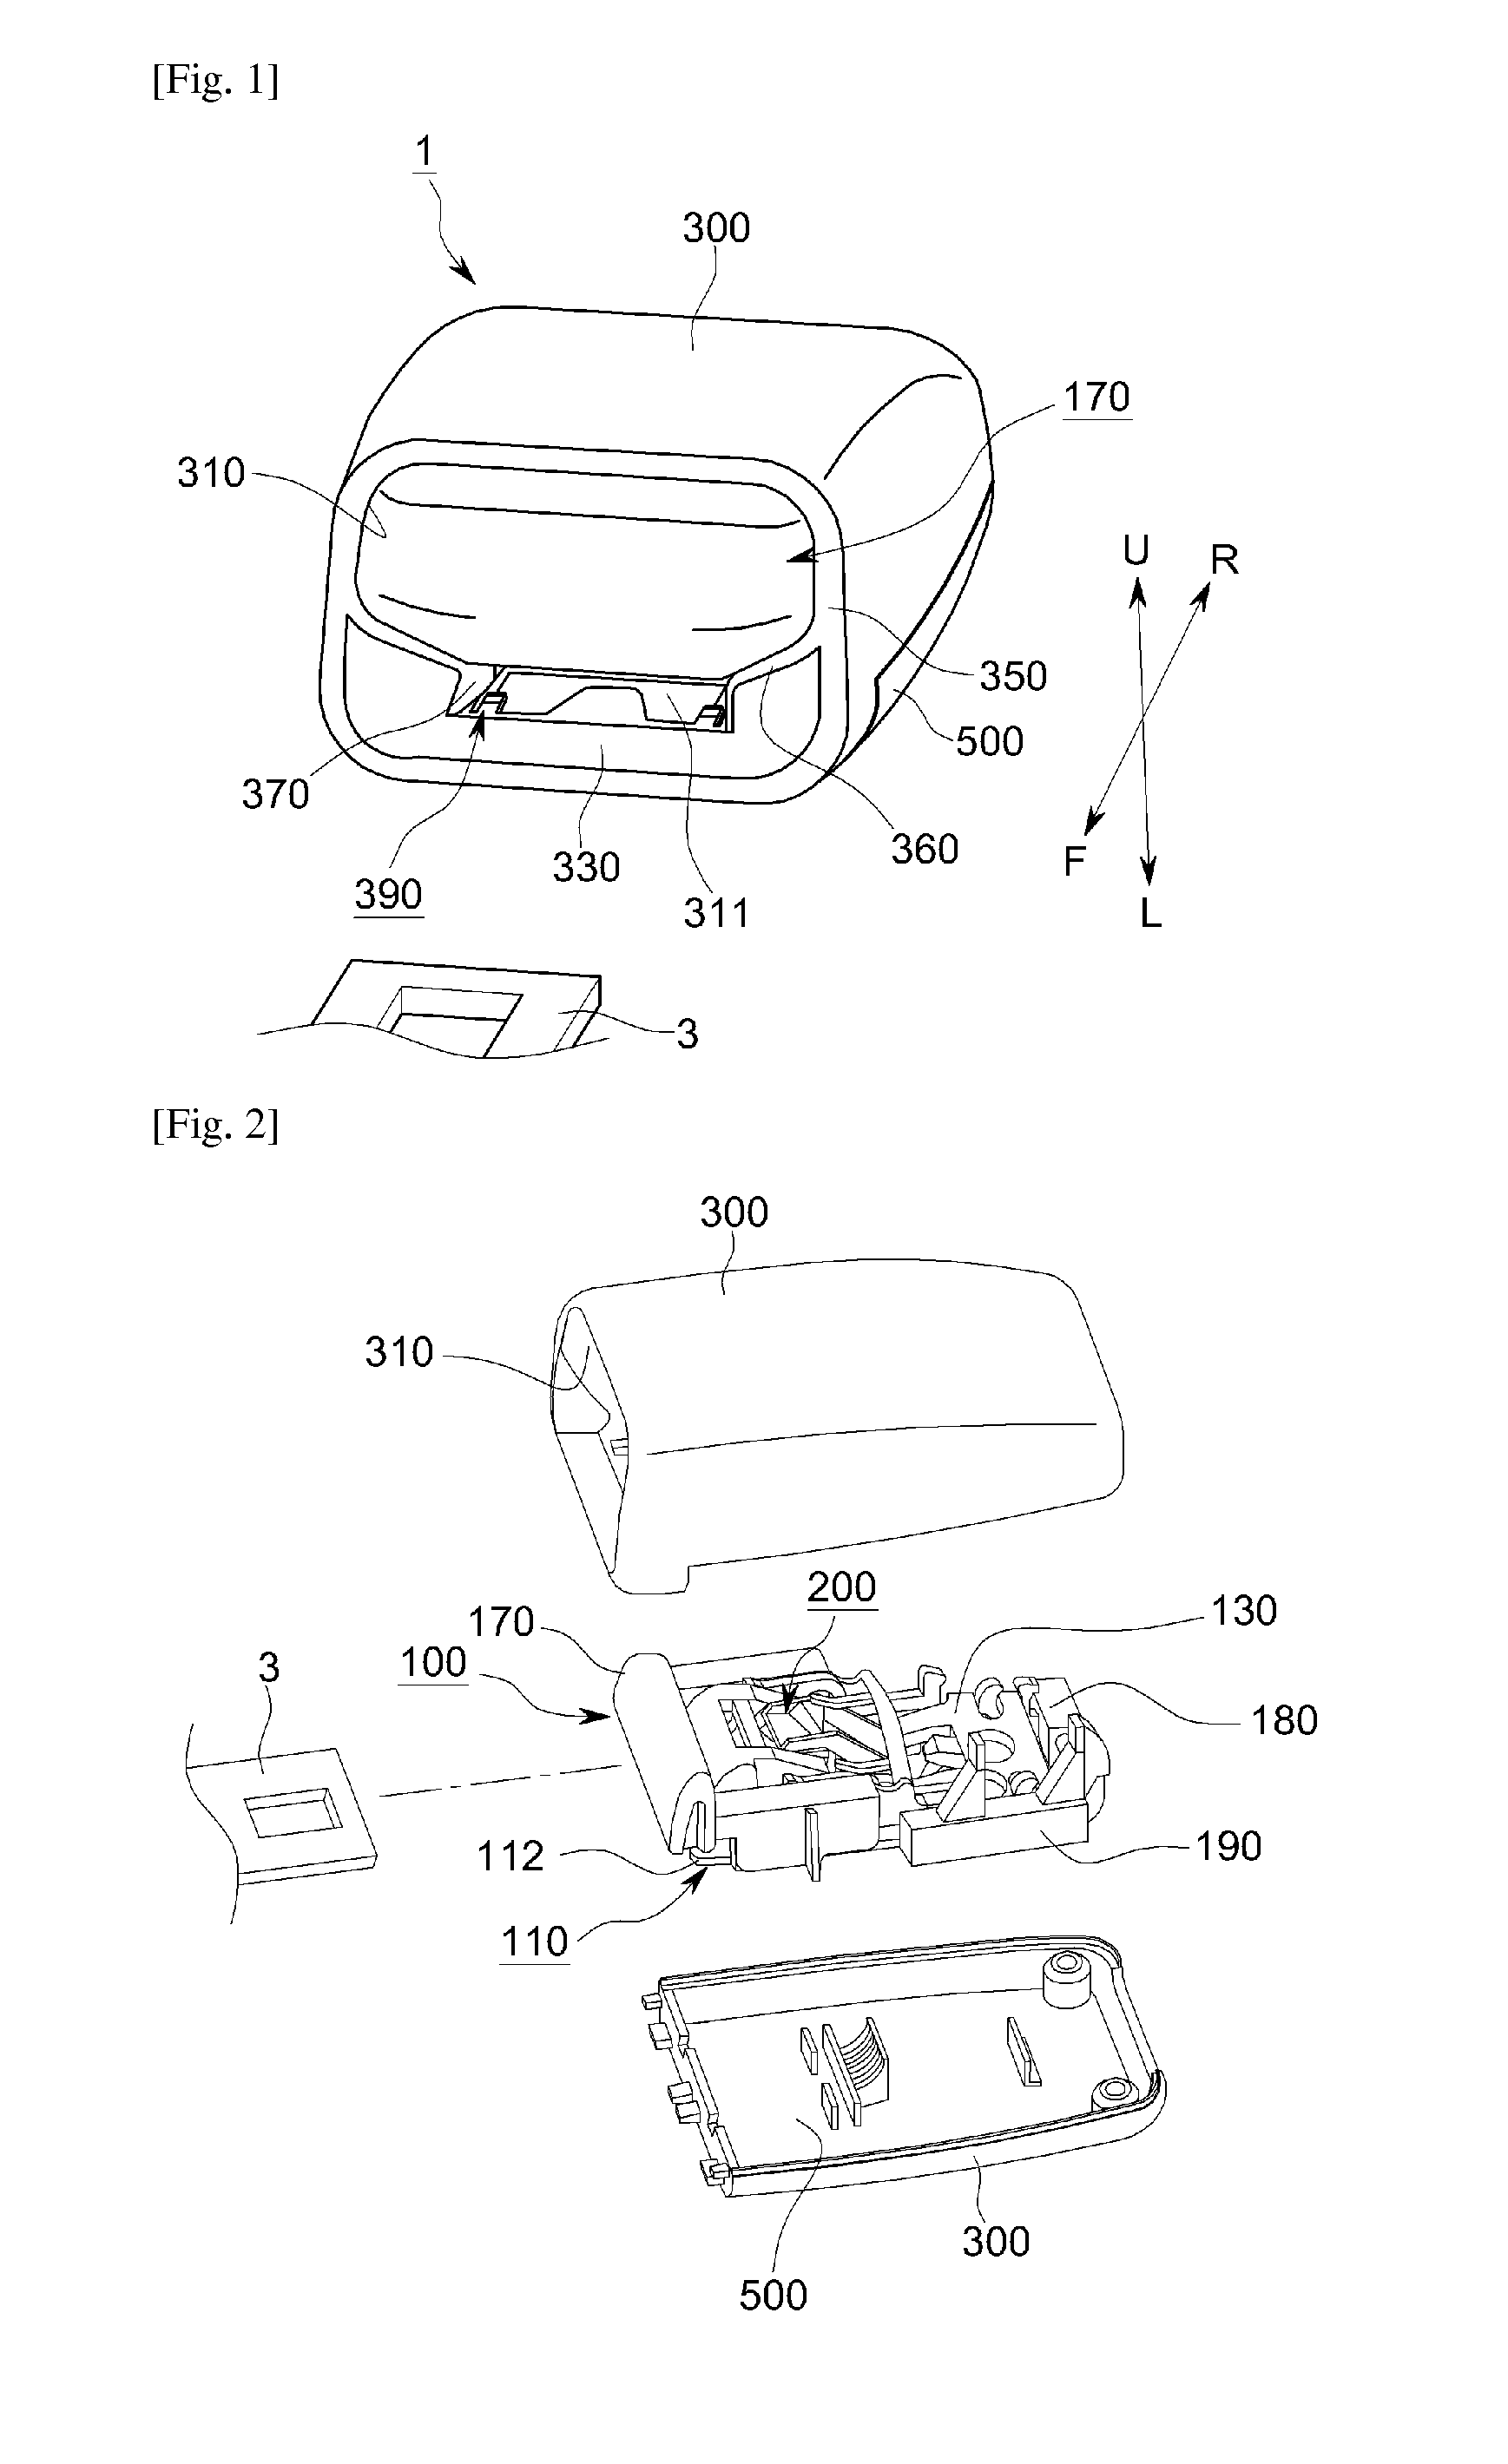 Buckle apparatus for seat belt